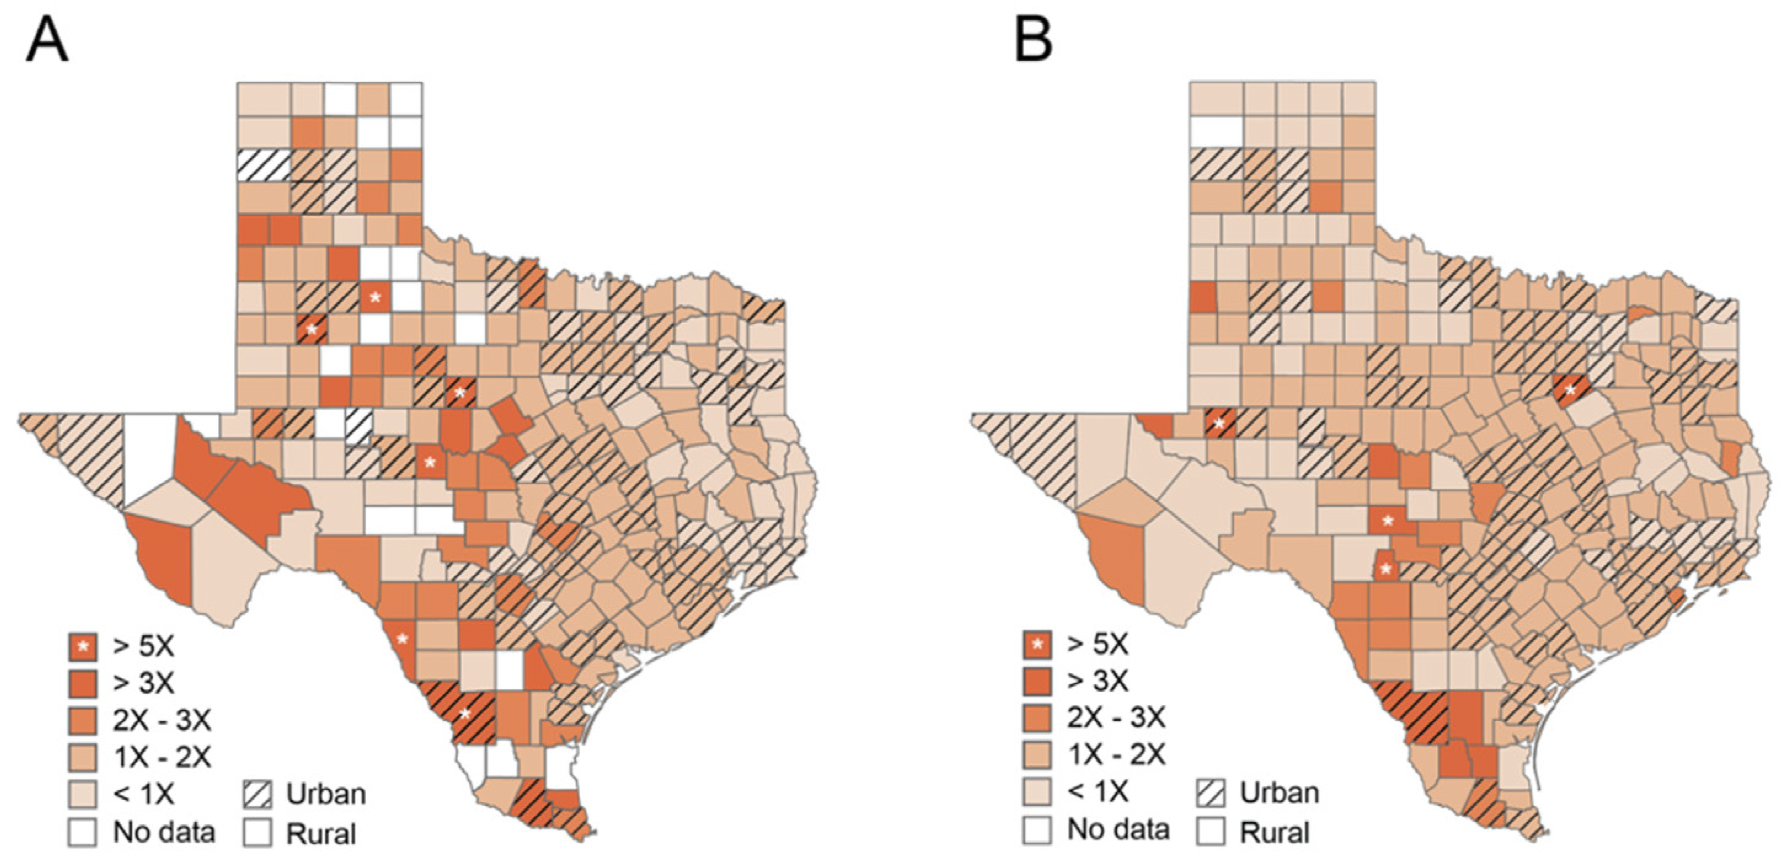 These maps compare racial disparities in vaccination rates by Texas county.